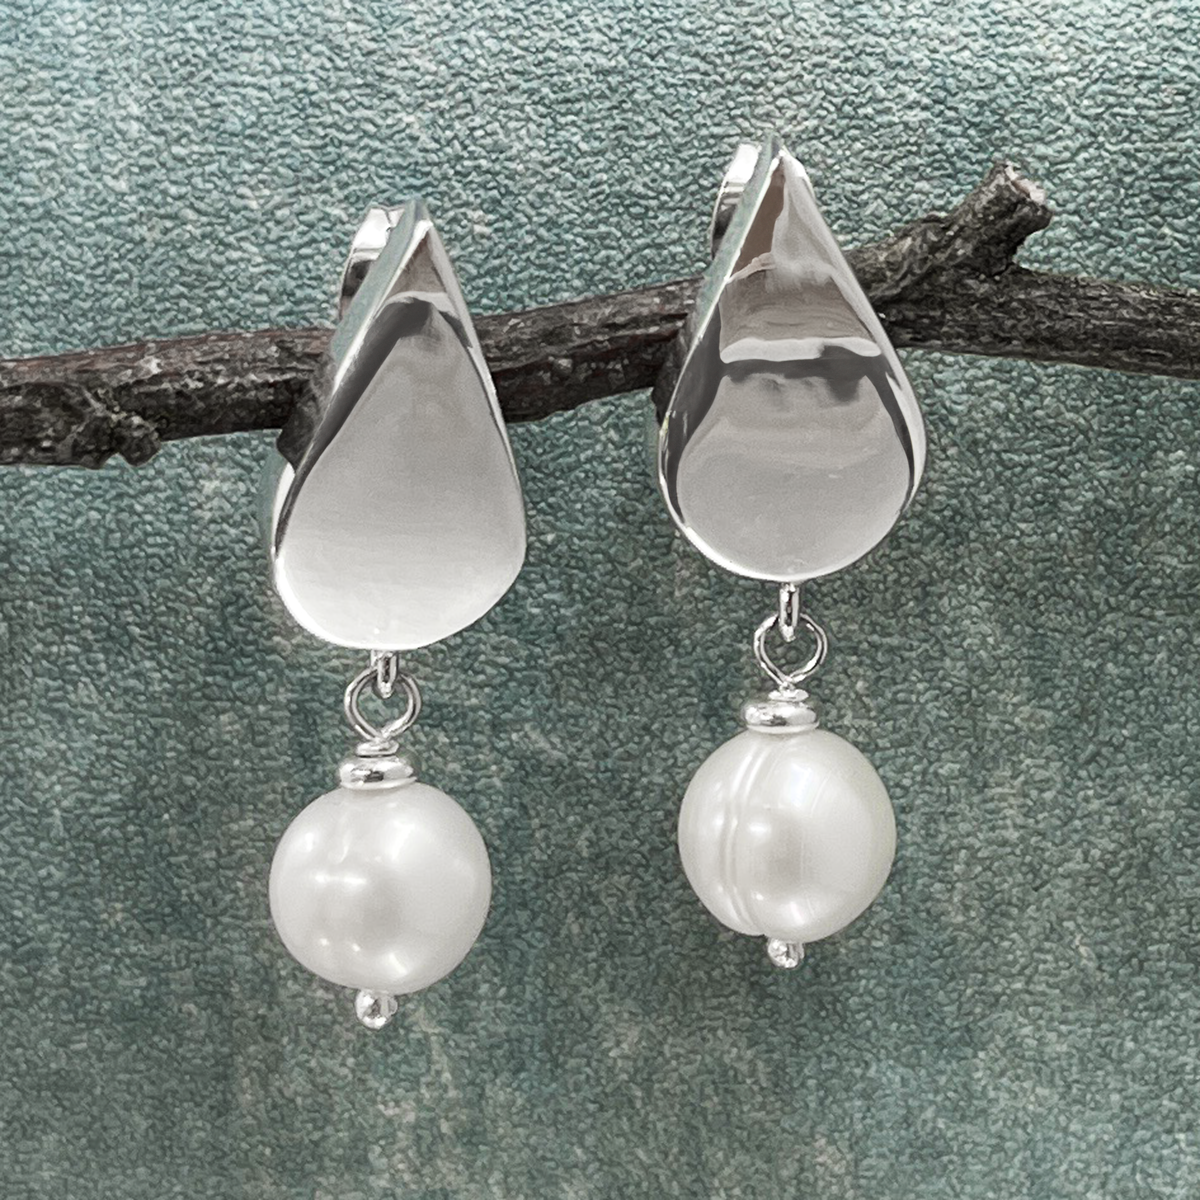 Pearla - Drop with White Pearl Silver Earrings - Stud